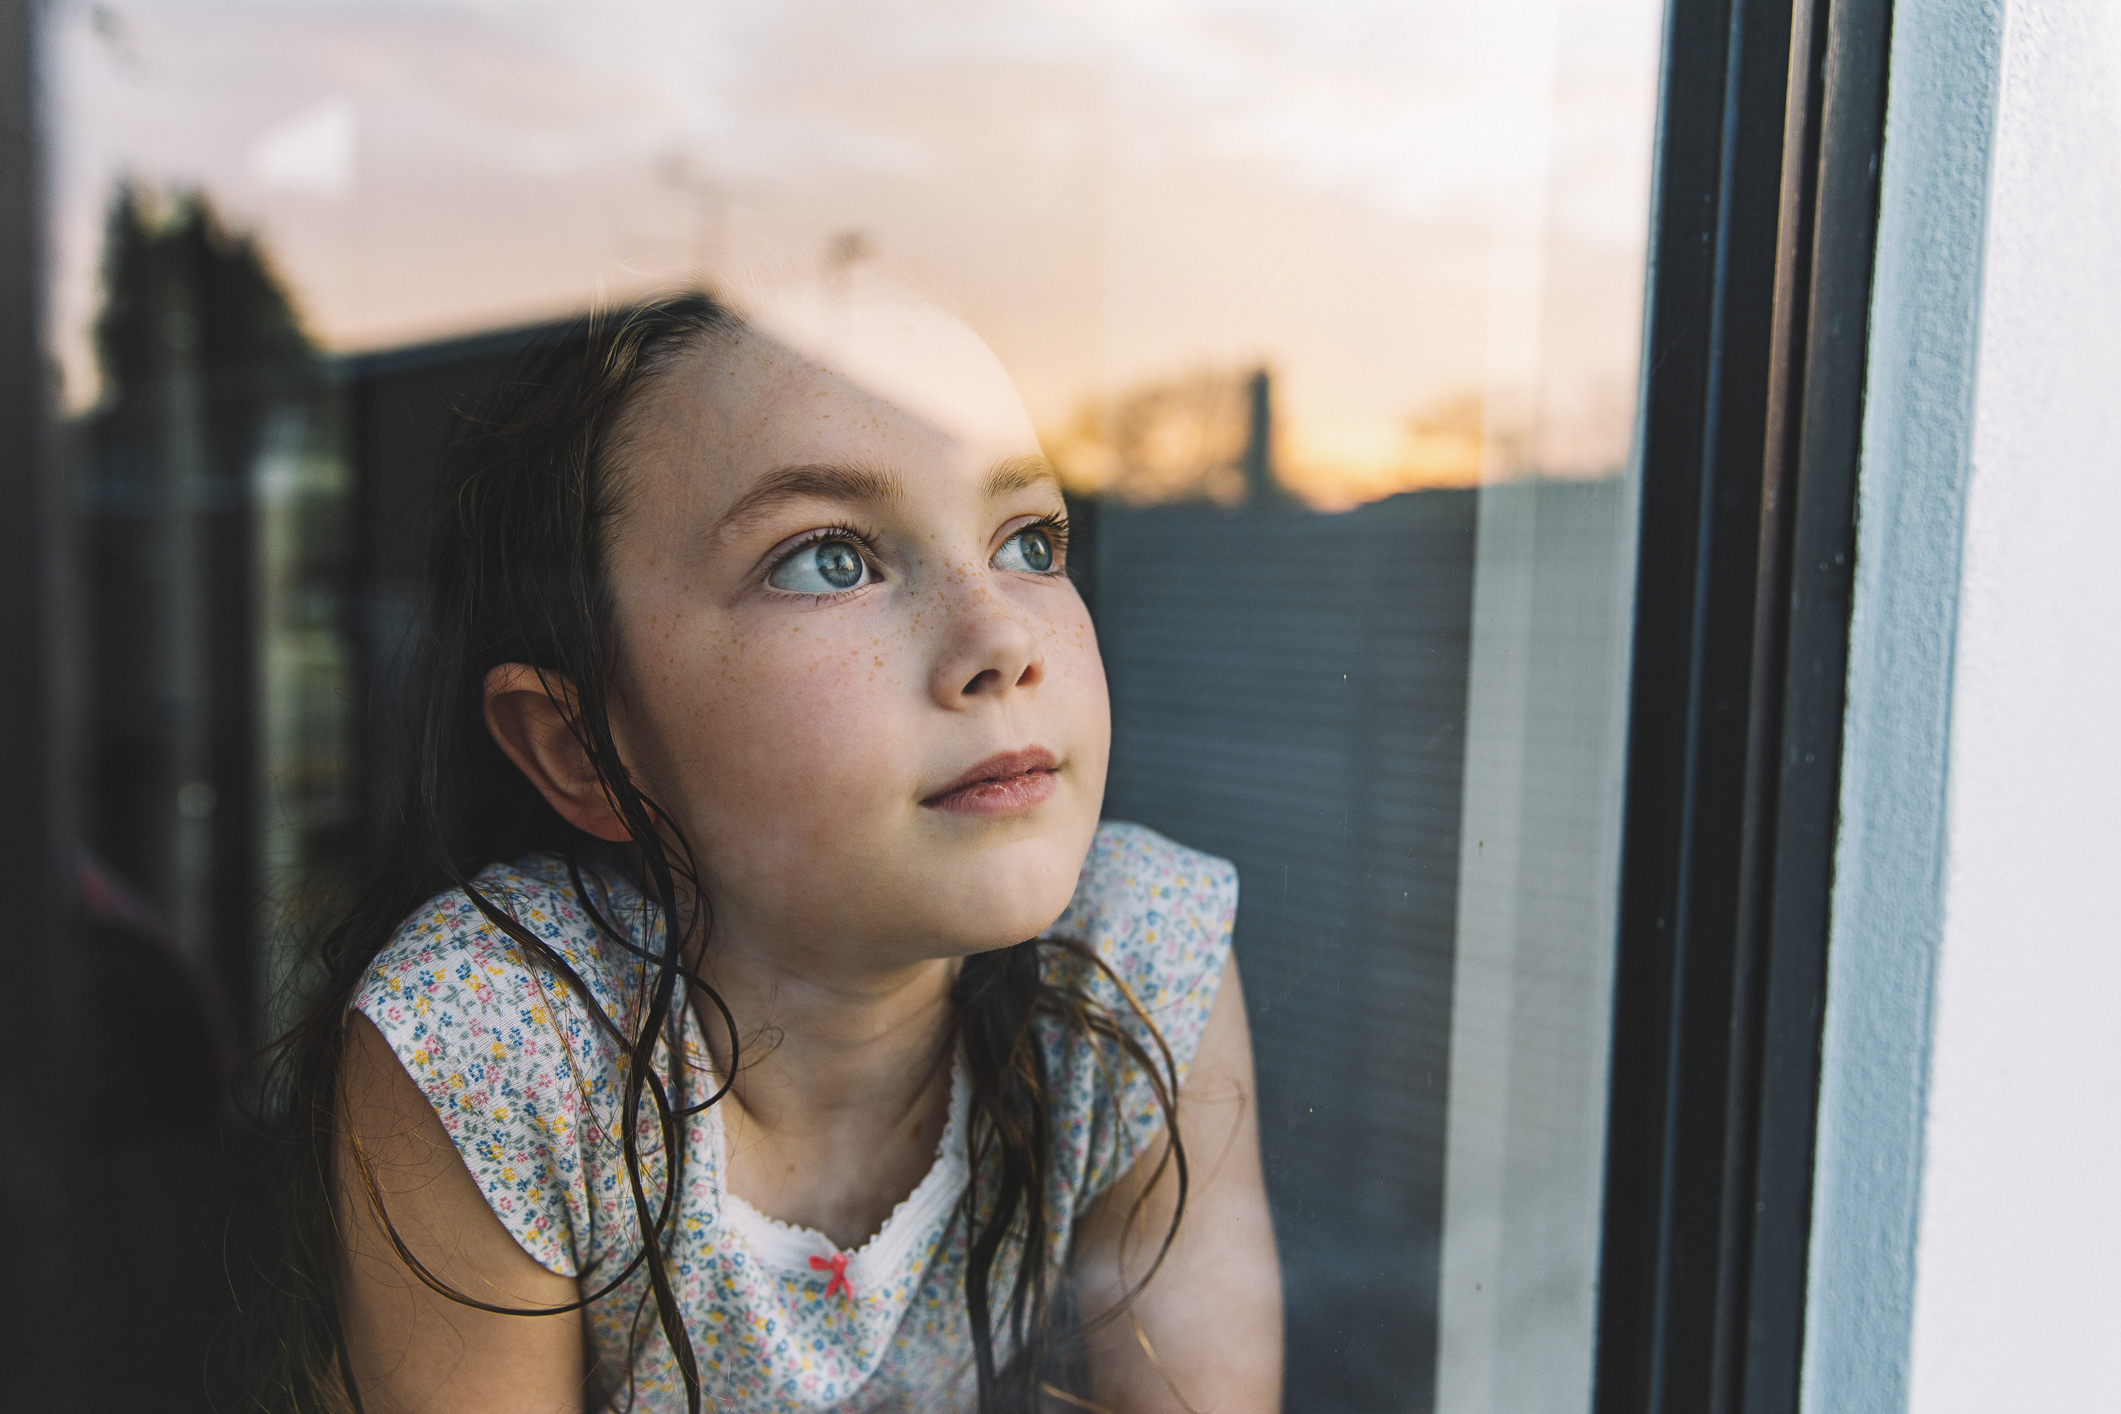 Young girl looking through window at sunset